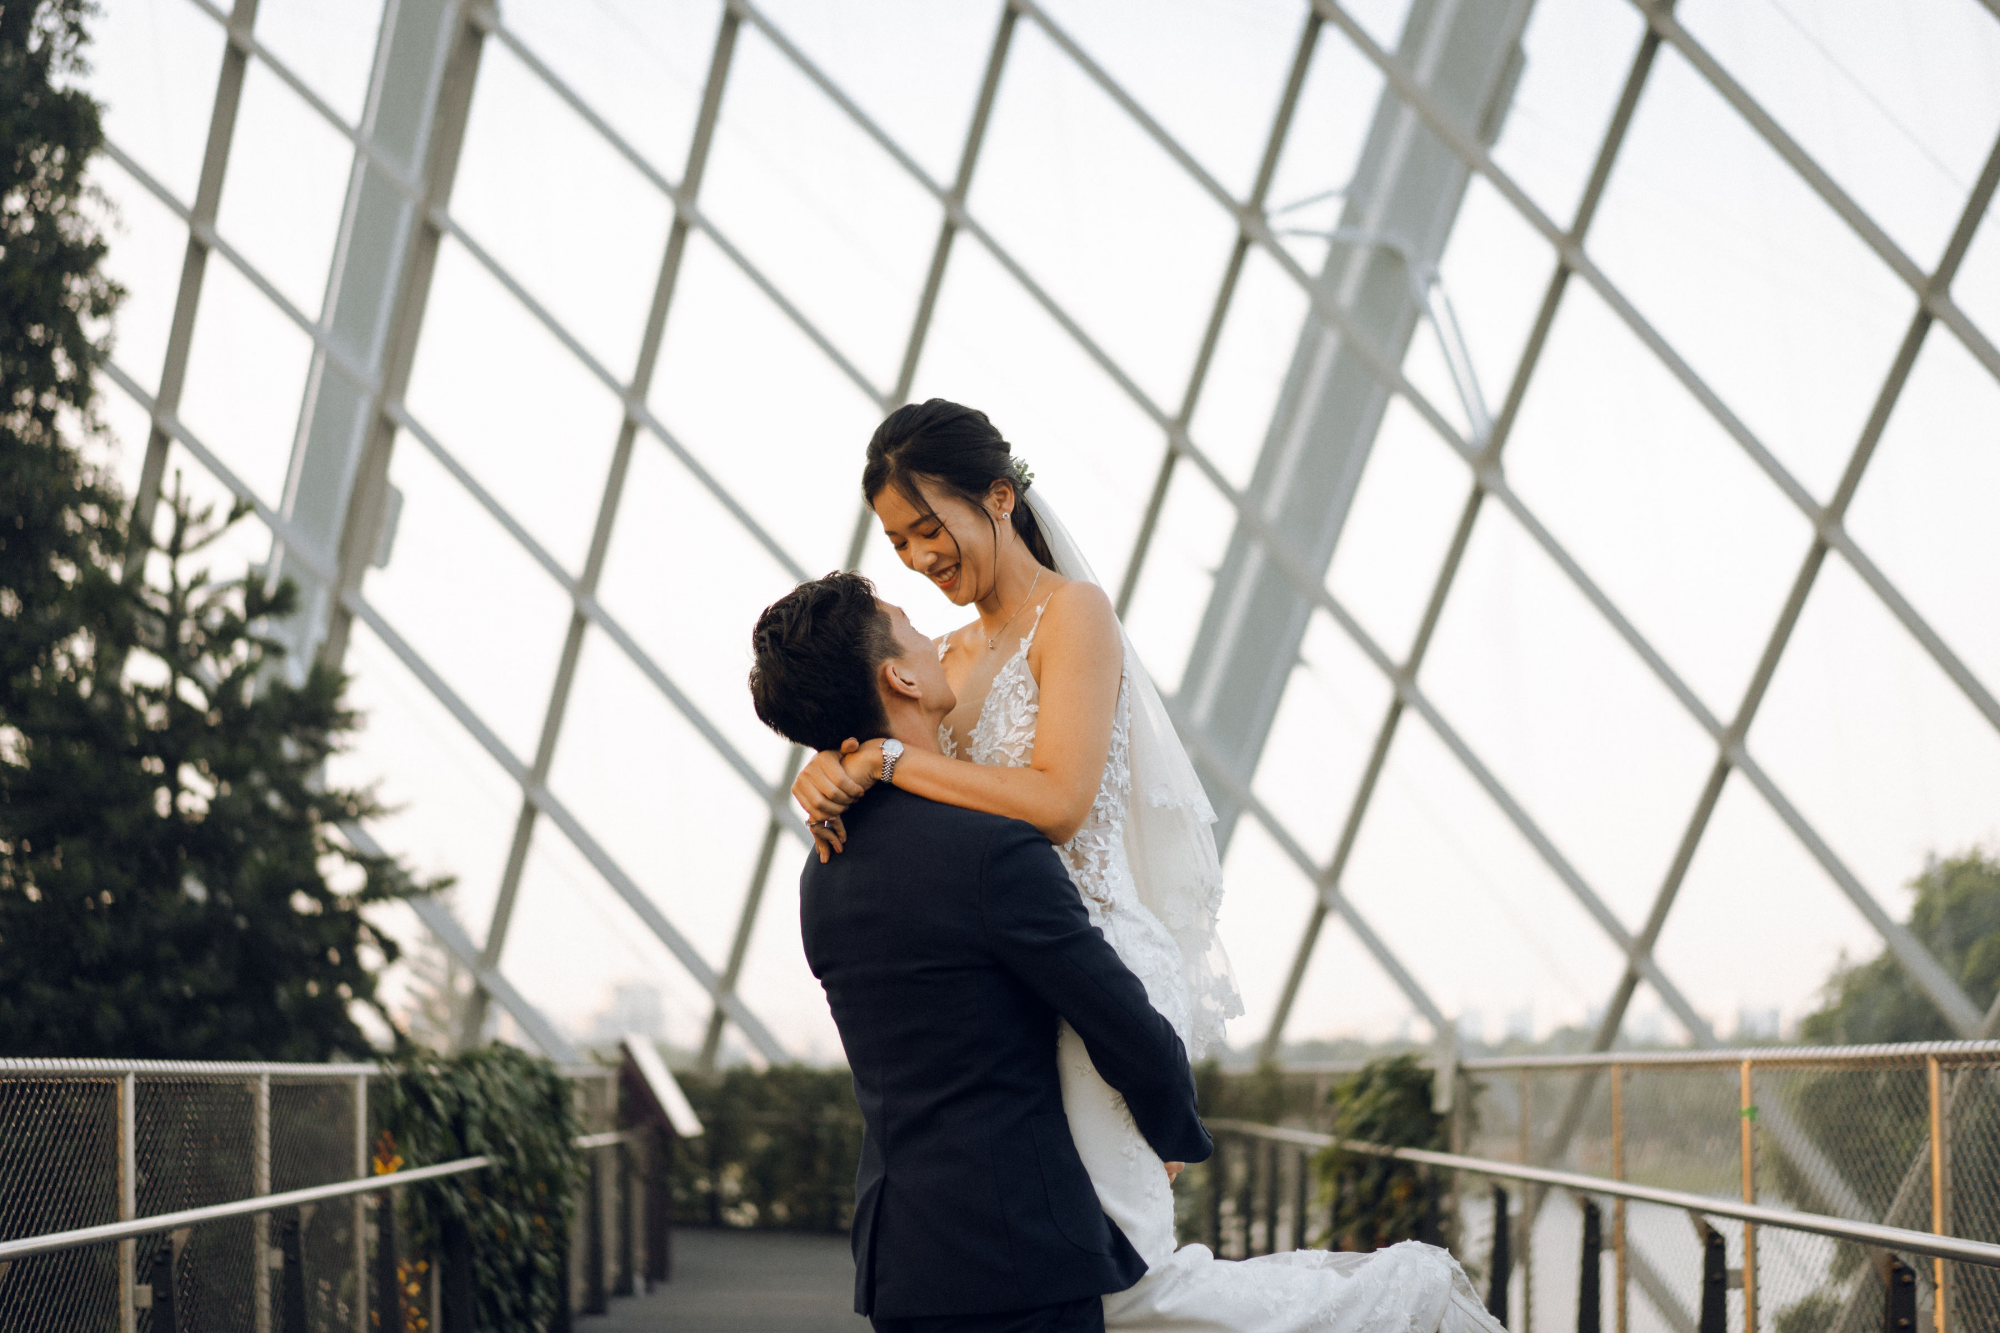 Sunset Prewedding Photoshoot At Cloud Forest, Gardens By The Bay  by Samantha on OneThreeOneFour 16